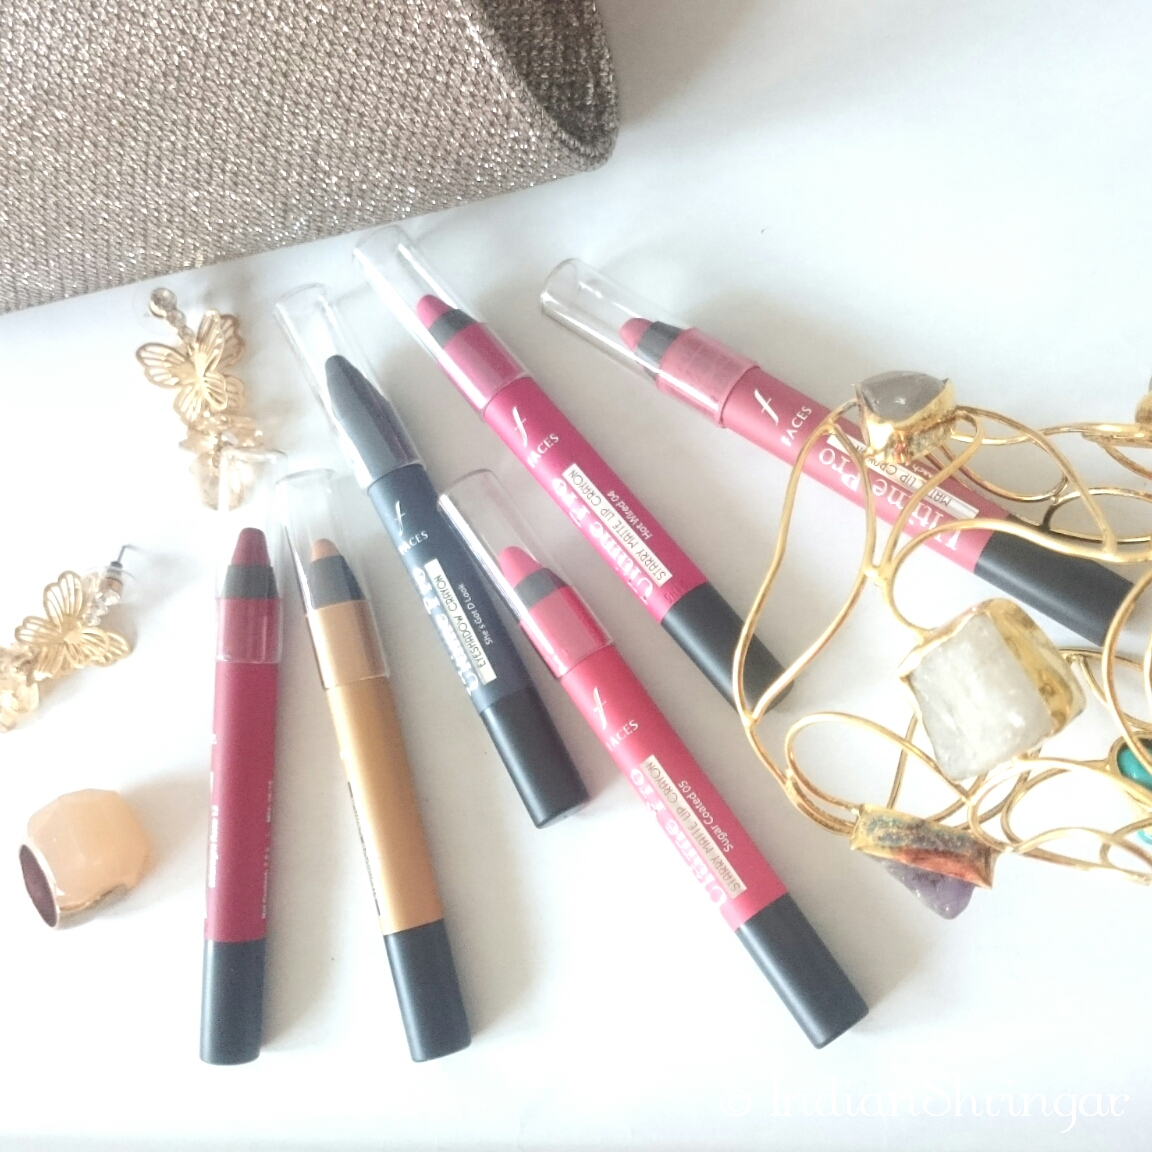 FACES Ultime Pro Lip Crayon and Eye Crayon Review and Swatches